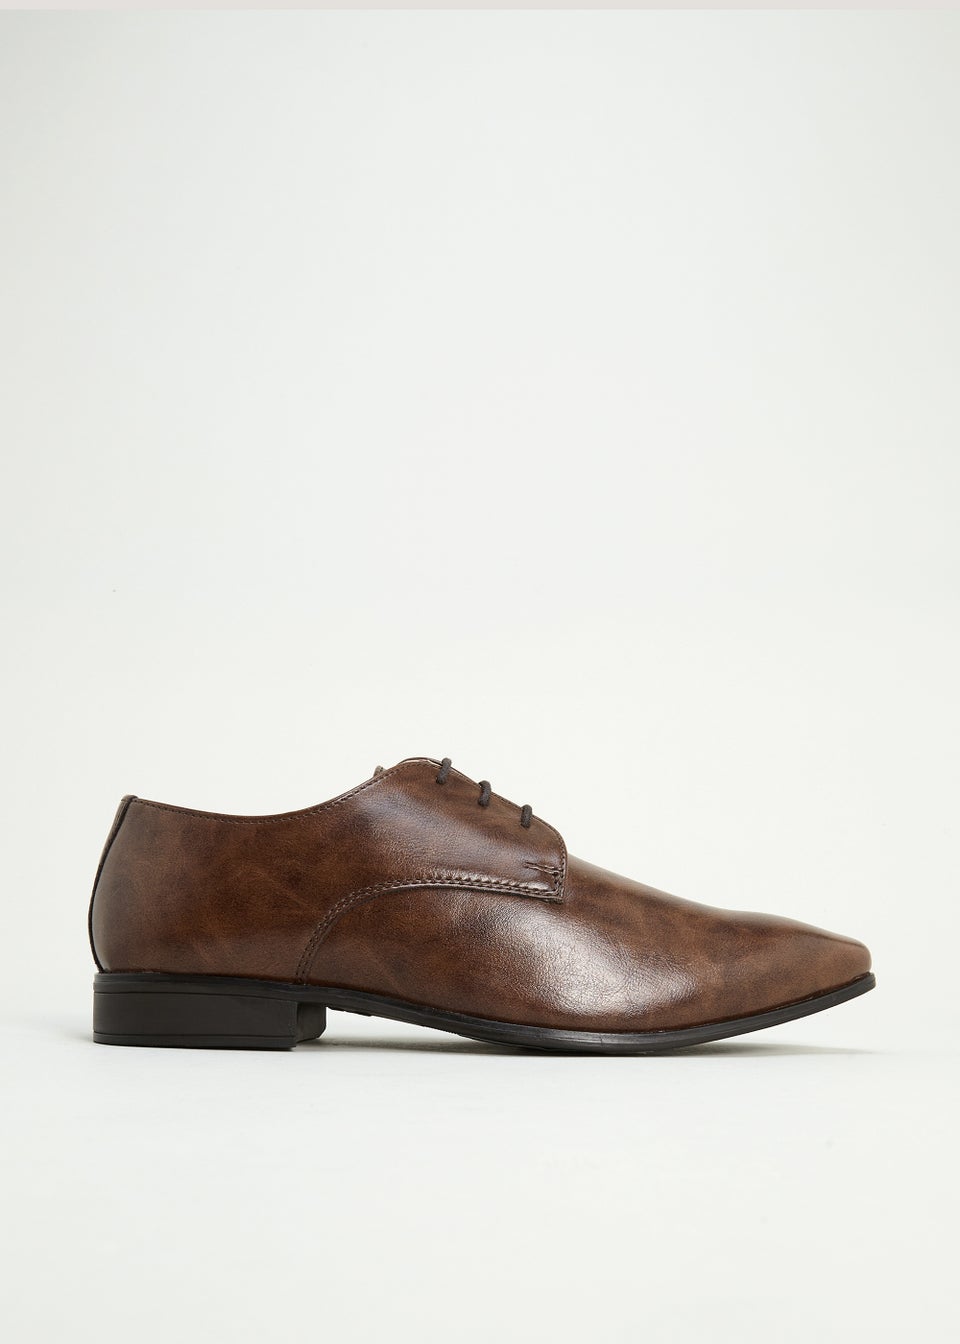 Brown Derby Shoes - Matalan